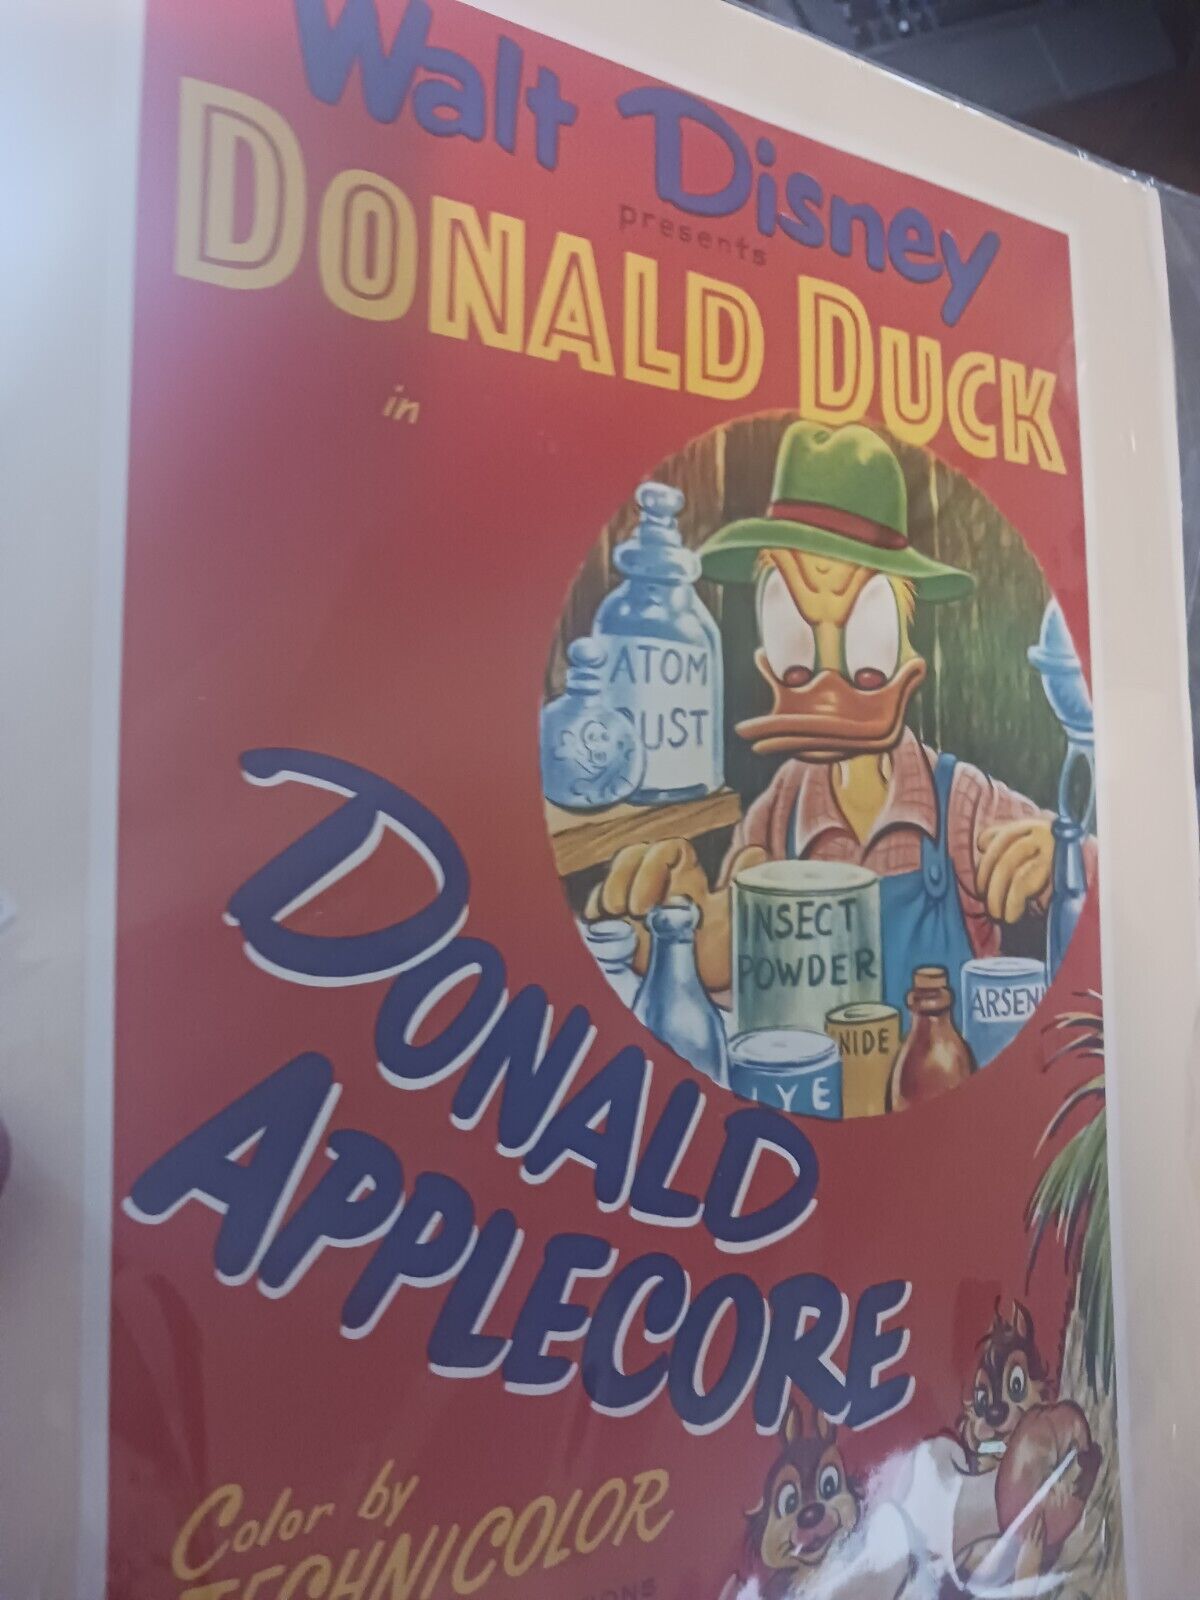 Disney Donald Duck Matted Poster Print (Vintage?) - Look